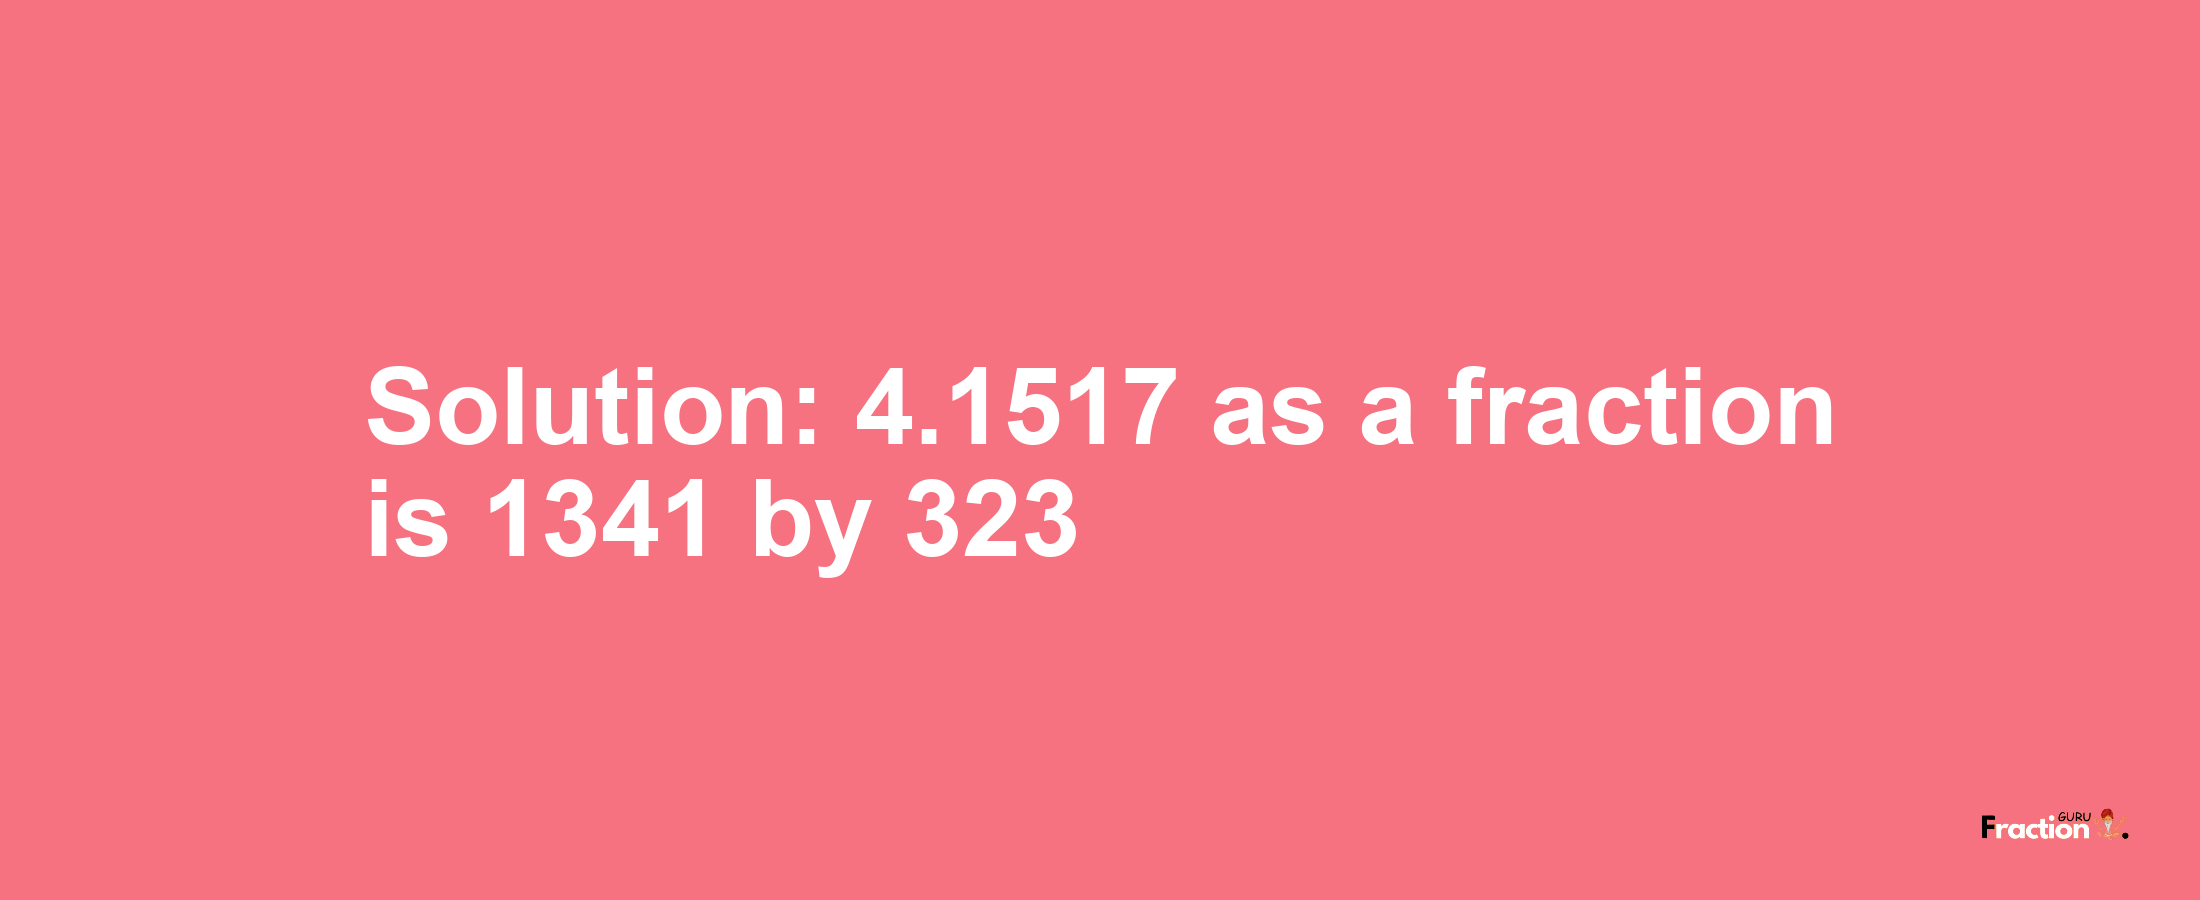 Solution:4.1517 as a fraction is 1341/323